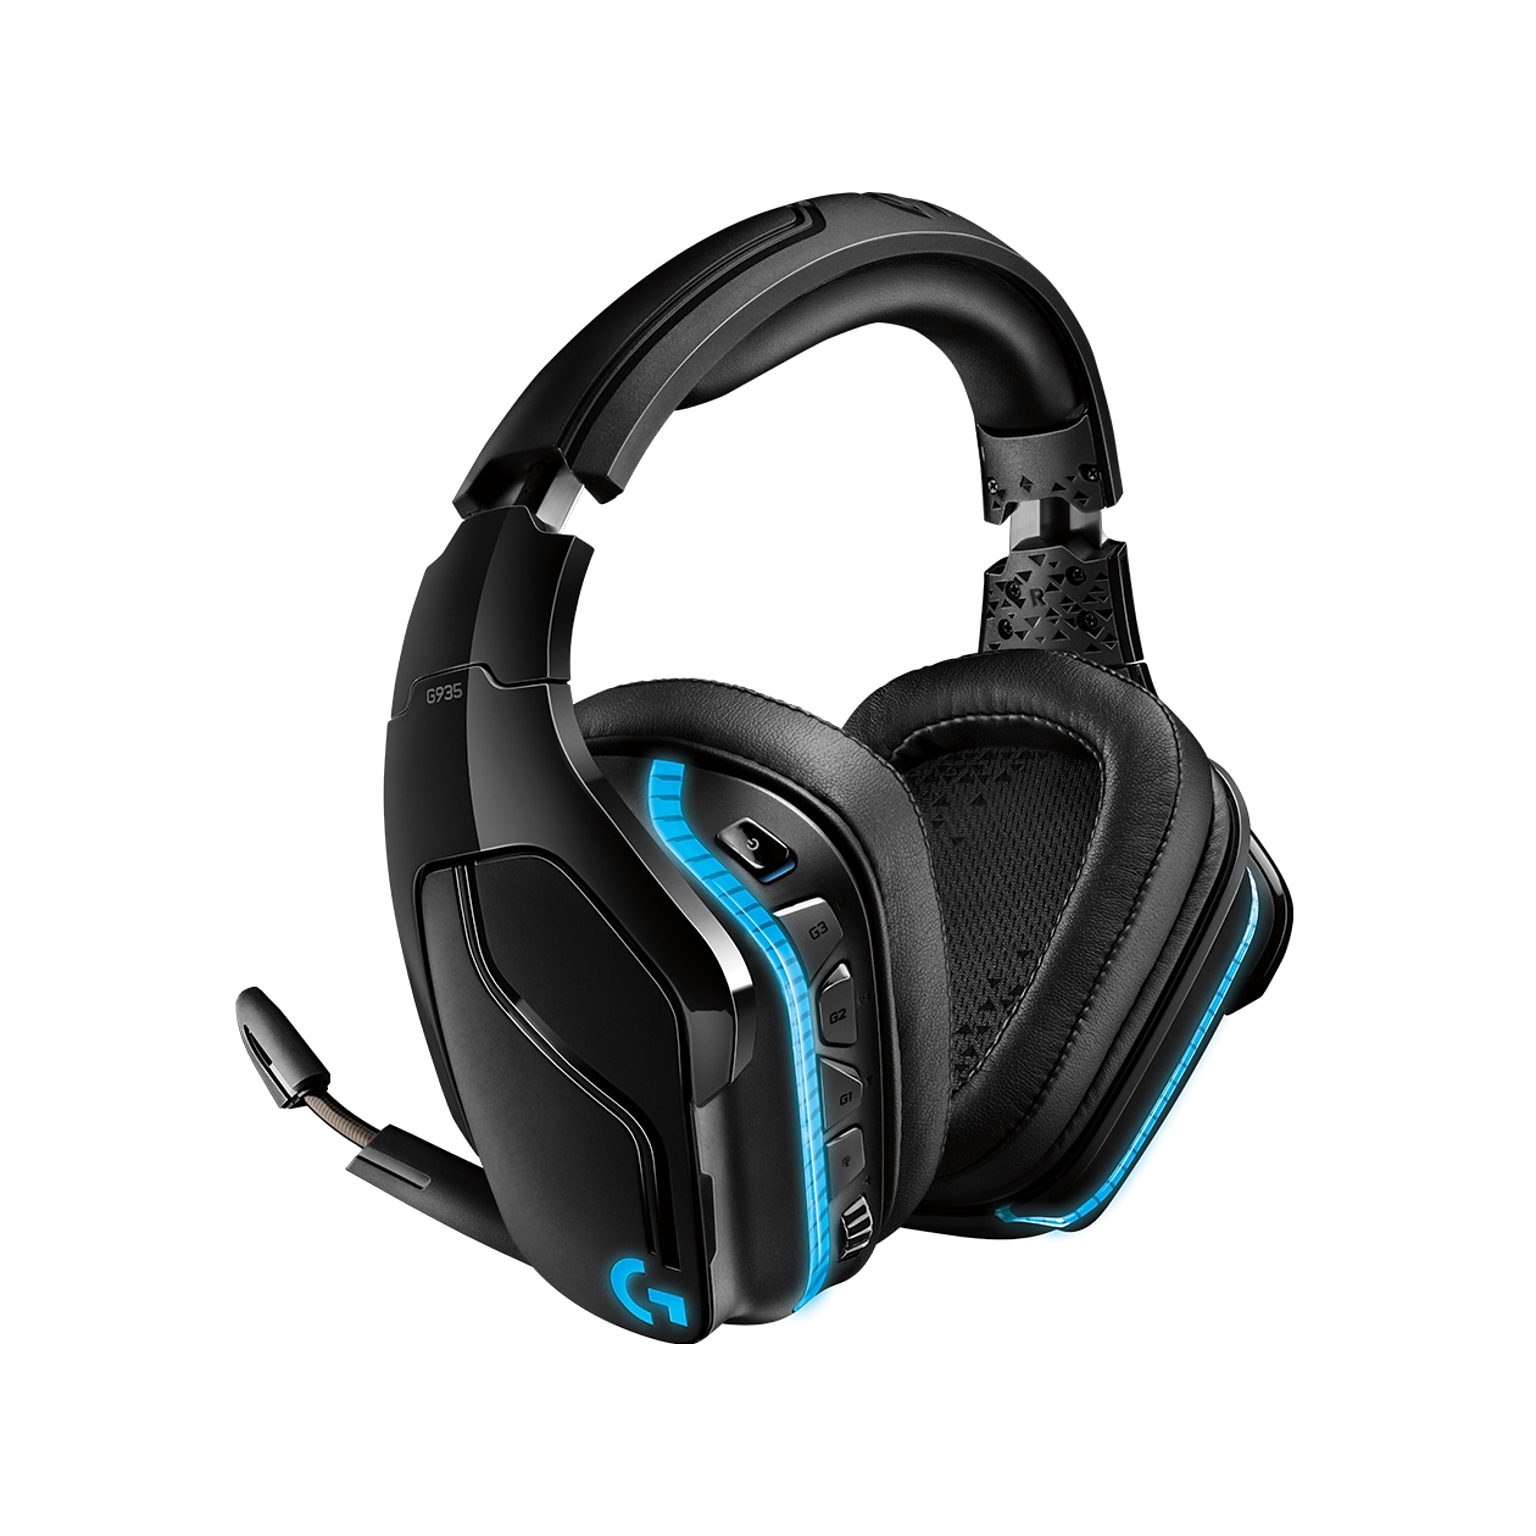 Logitech G Series G935 Wireless Over-the-Ear Gaming Headset, Black  (981-000742) | Quill.com